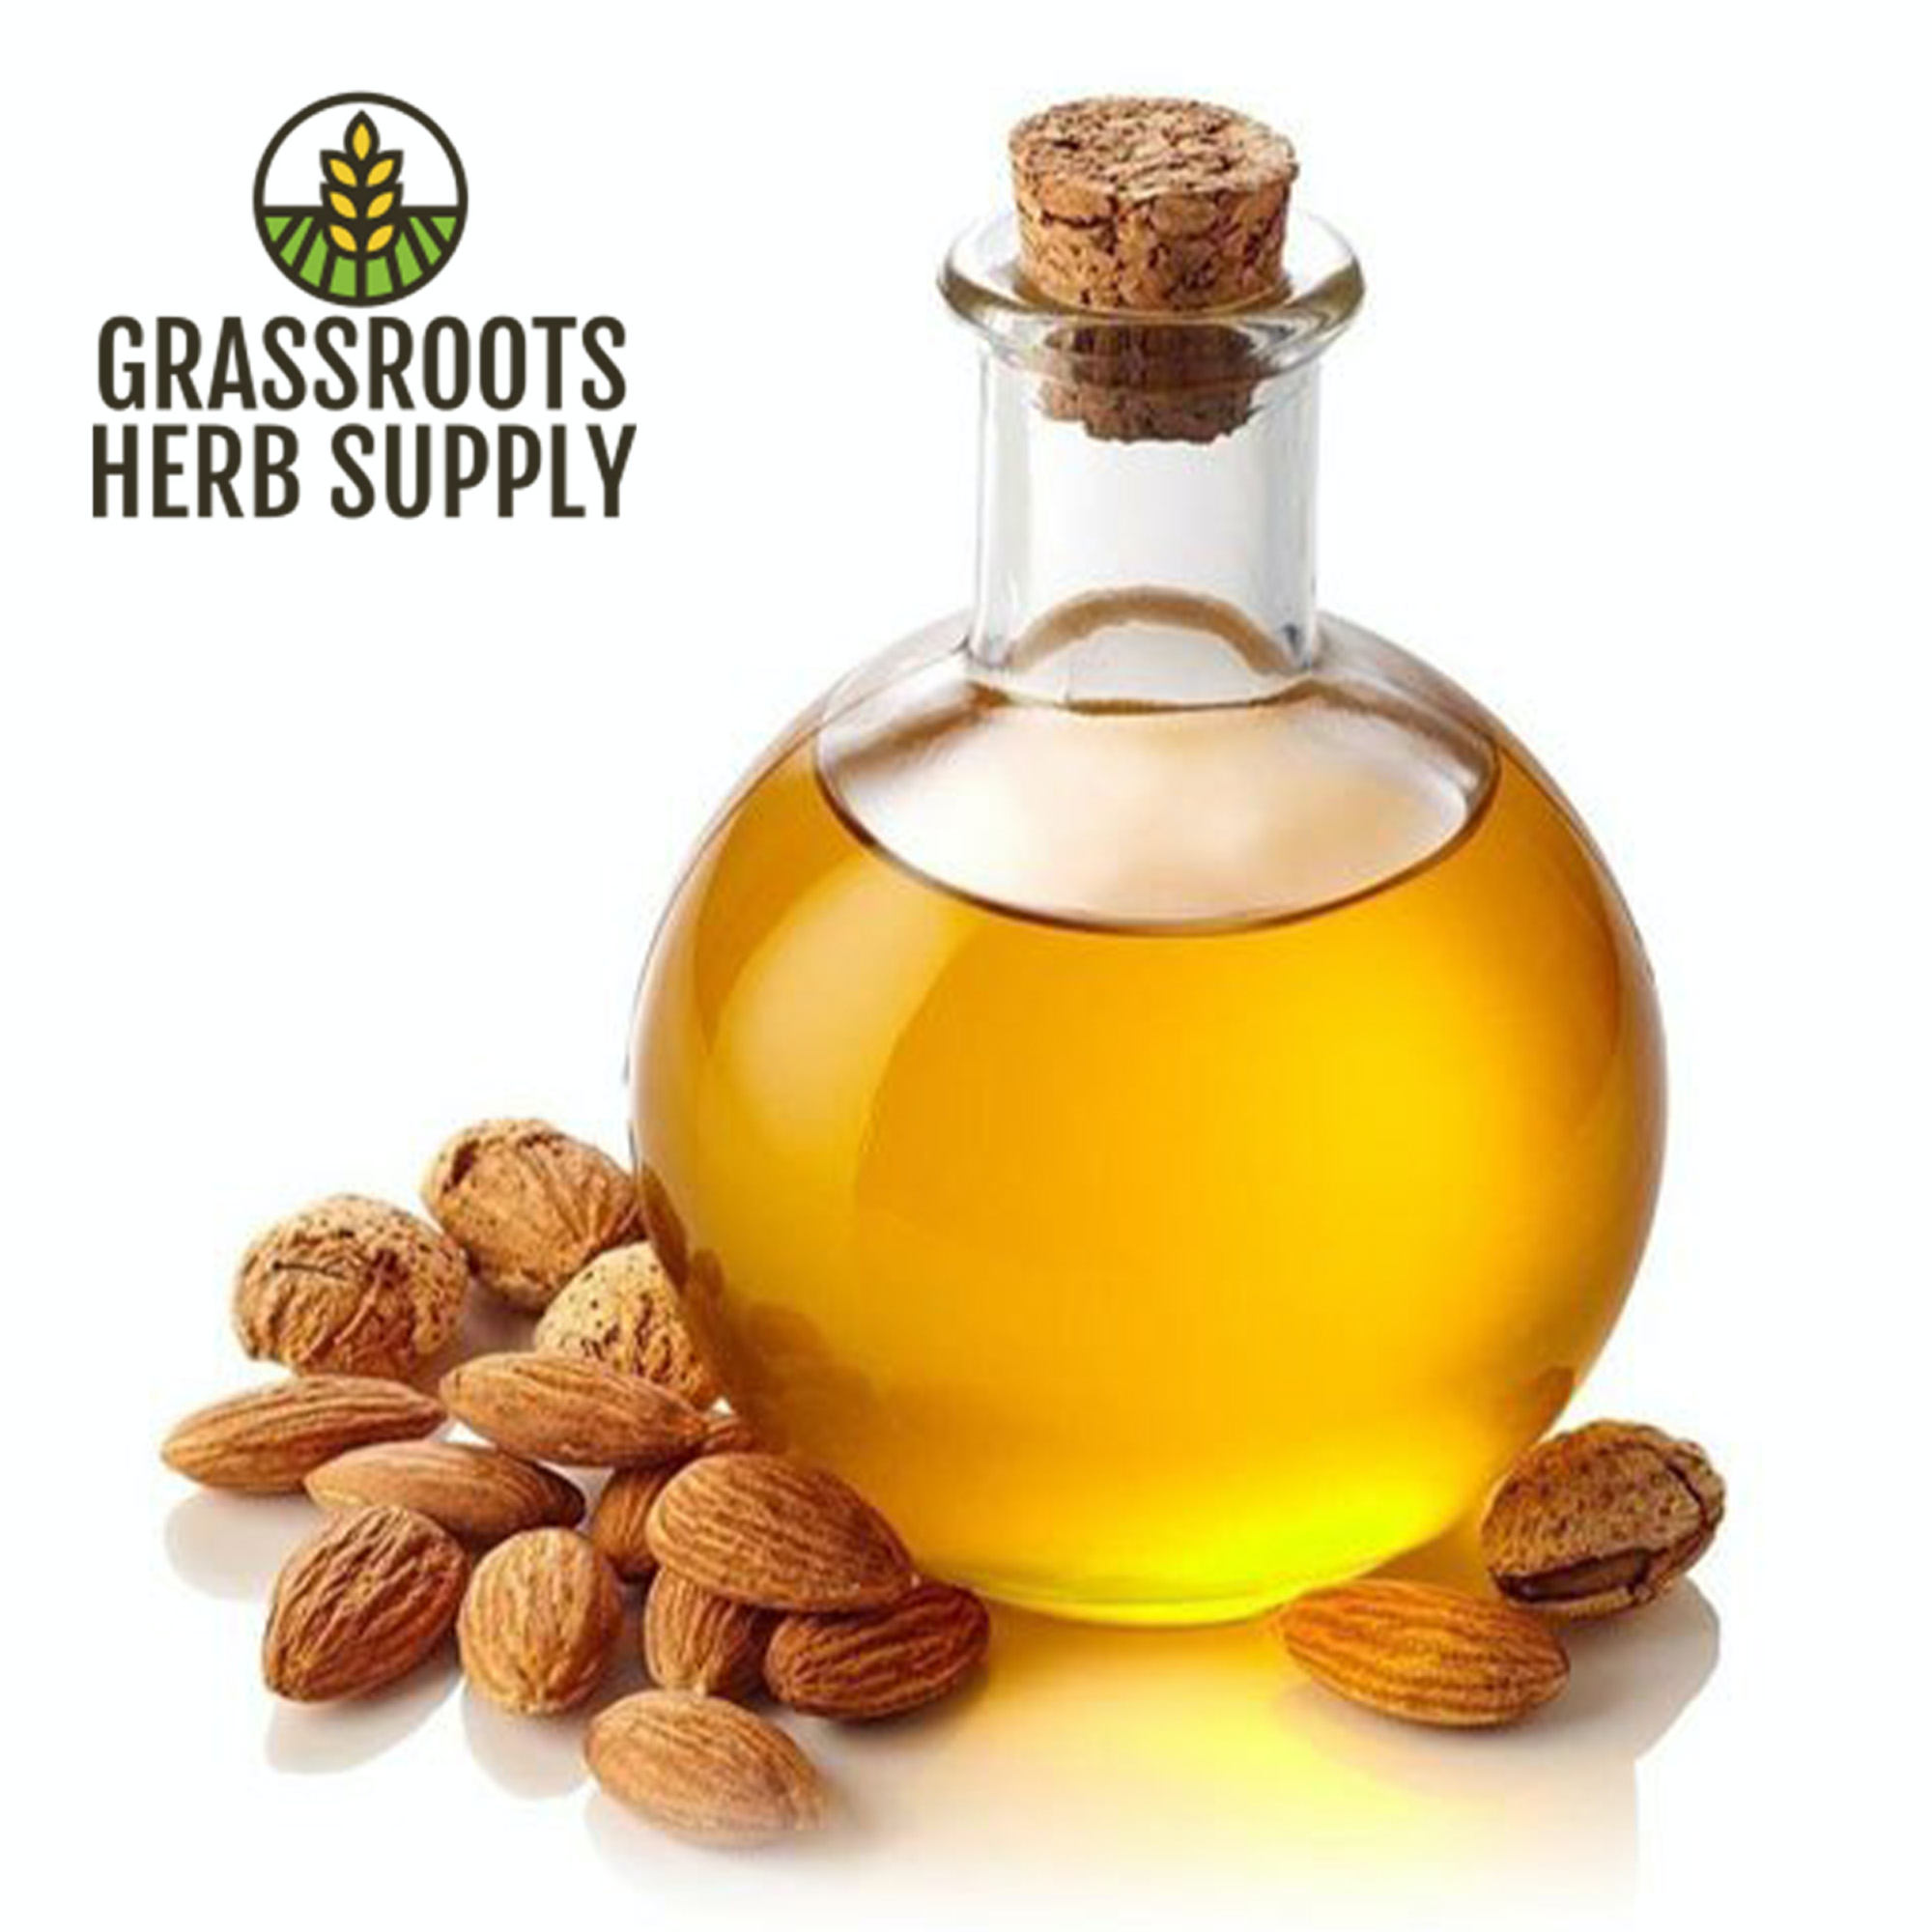 Sweet Almond Oil, Food Grade (35 Pounds)